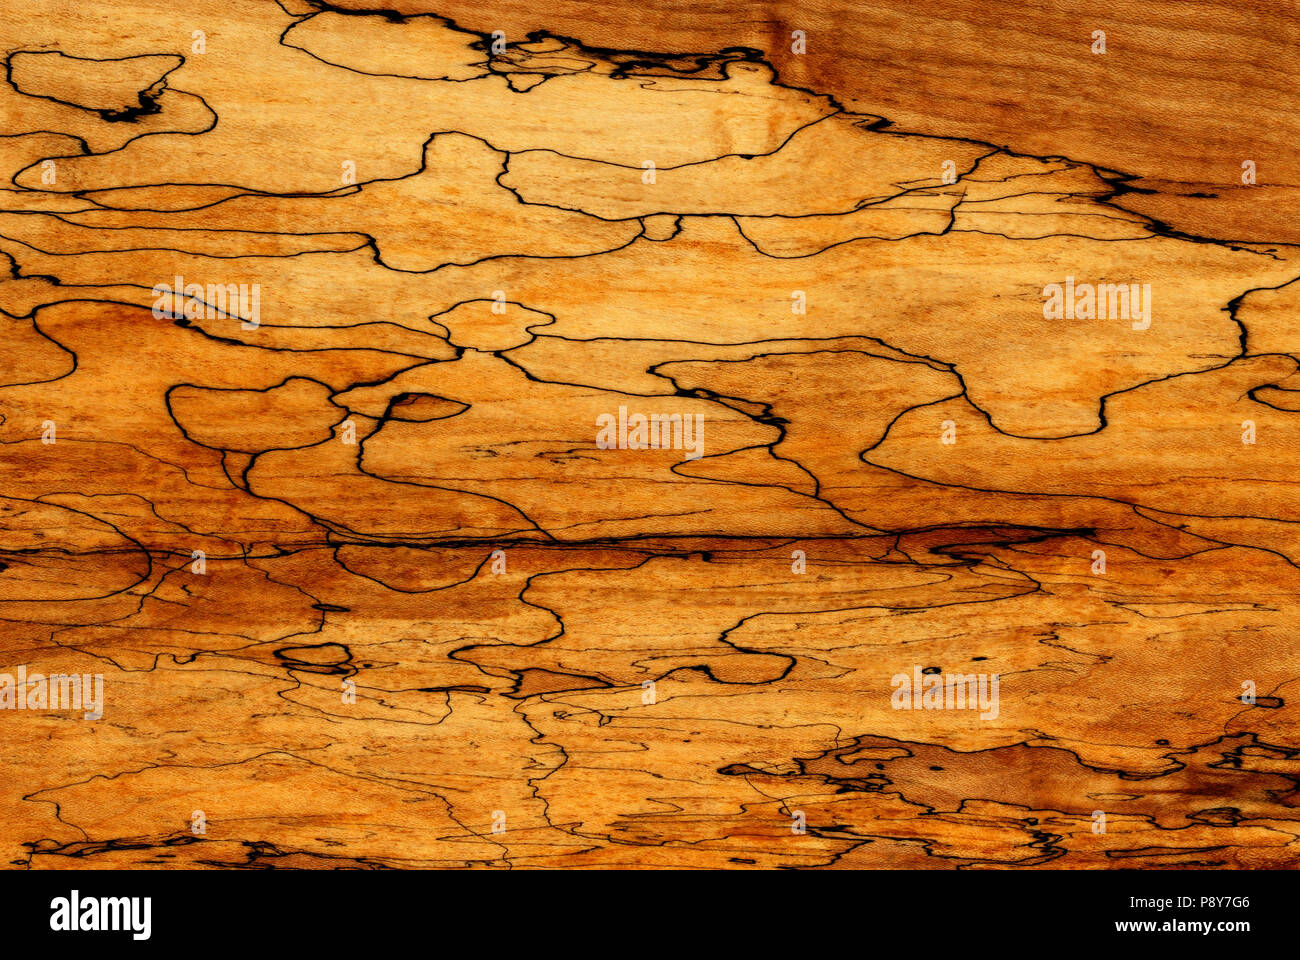 Spalted Pattern On Sugar Maple (Acer saccharum) and Wood Grain. Spalting refers to coloration created by fungi. Stock Photo